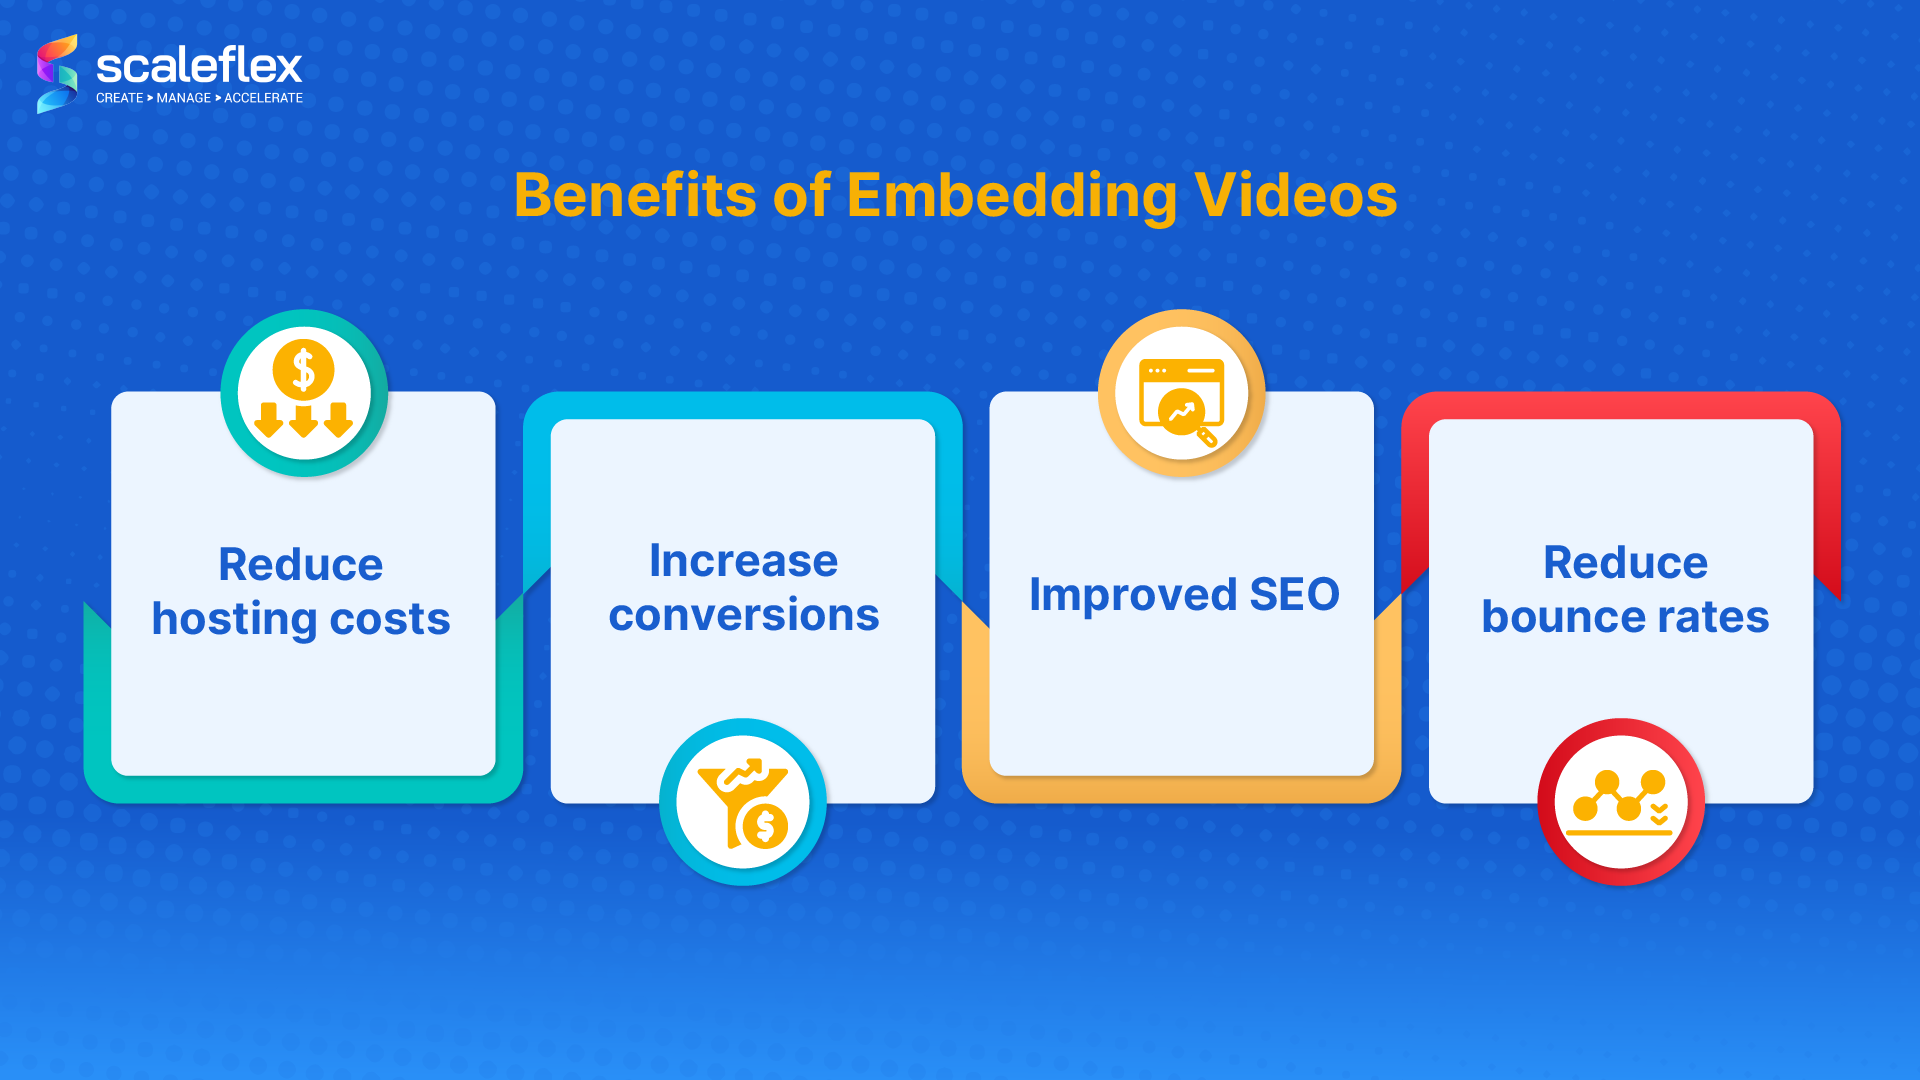 A graphic chart illustrates the main benefits of embedding video: reduced costs, increased conversions, improved SEO, and reduced bounce rates.